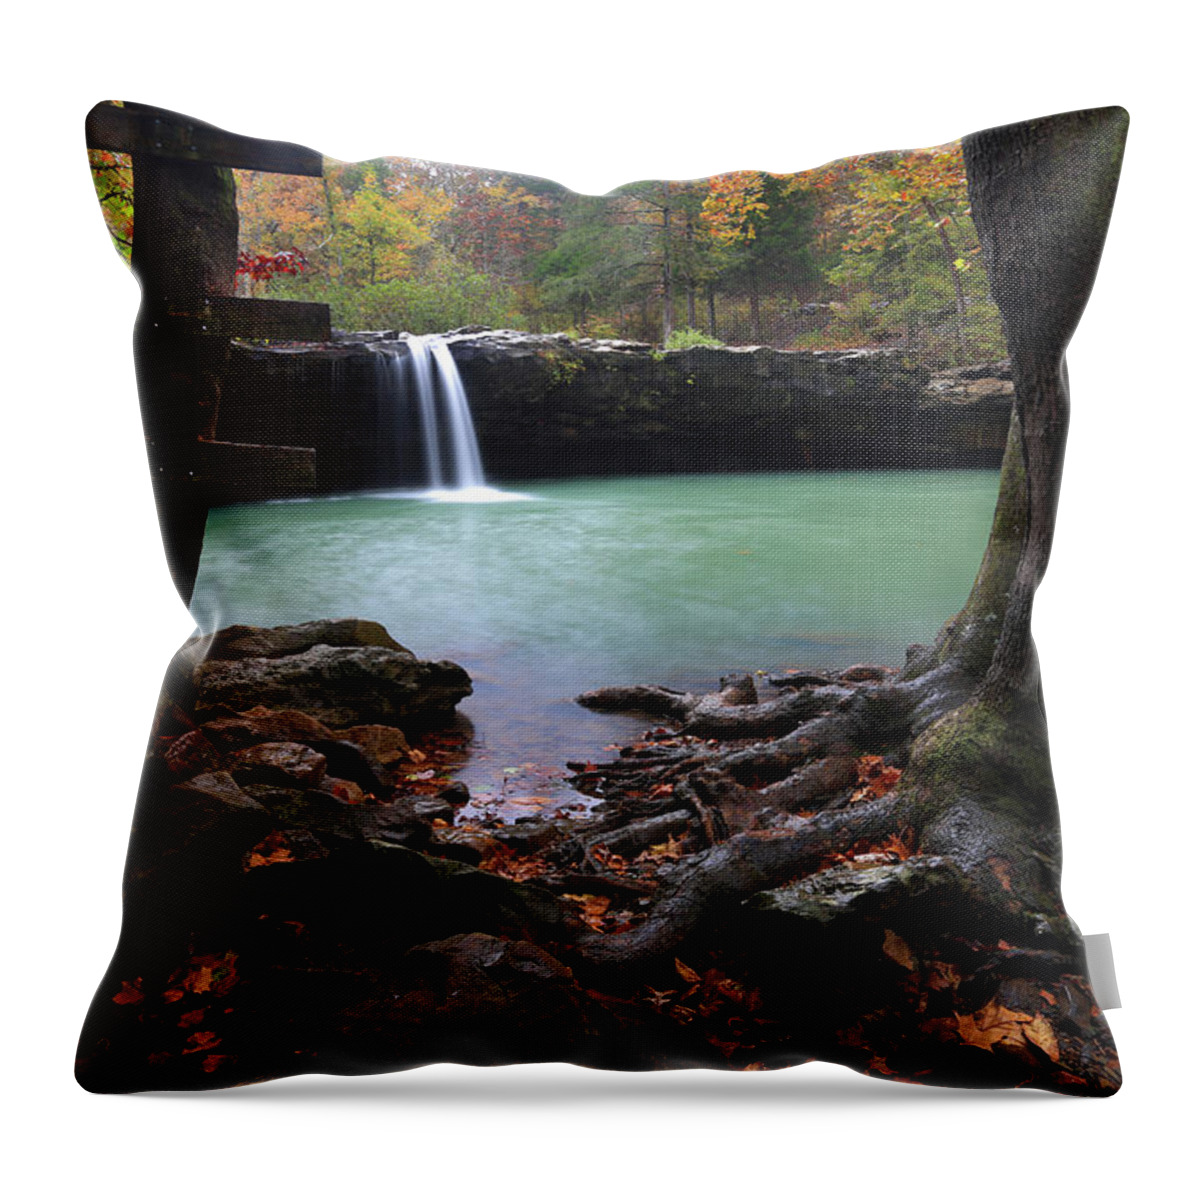  Throw Pillow featuring the photograph swimming Hole by William Rainey